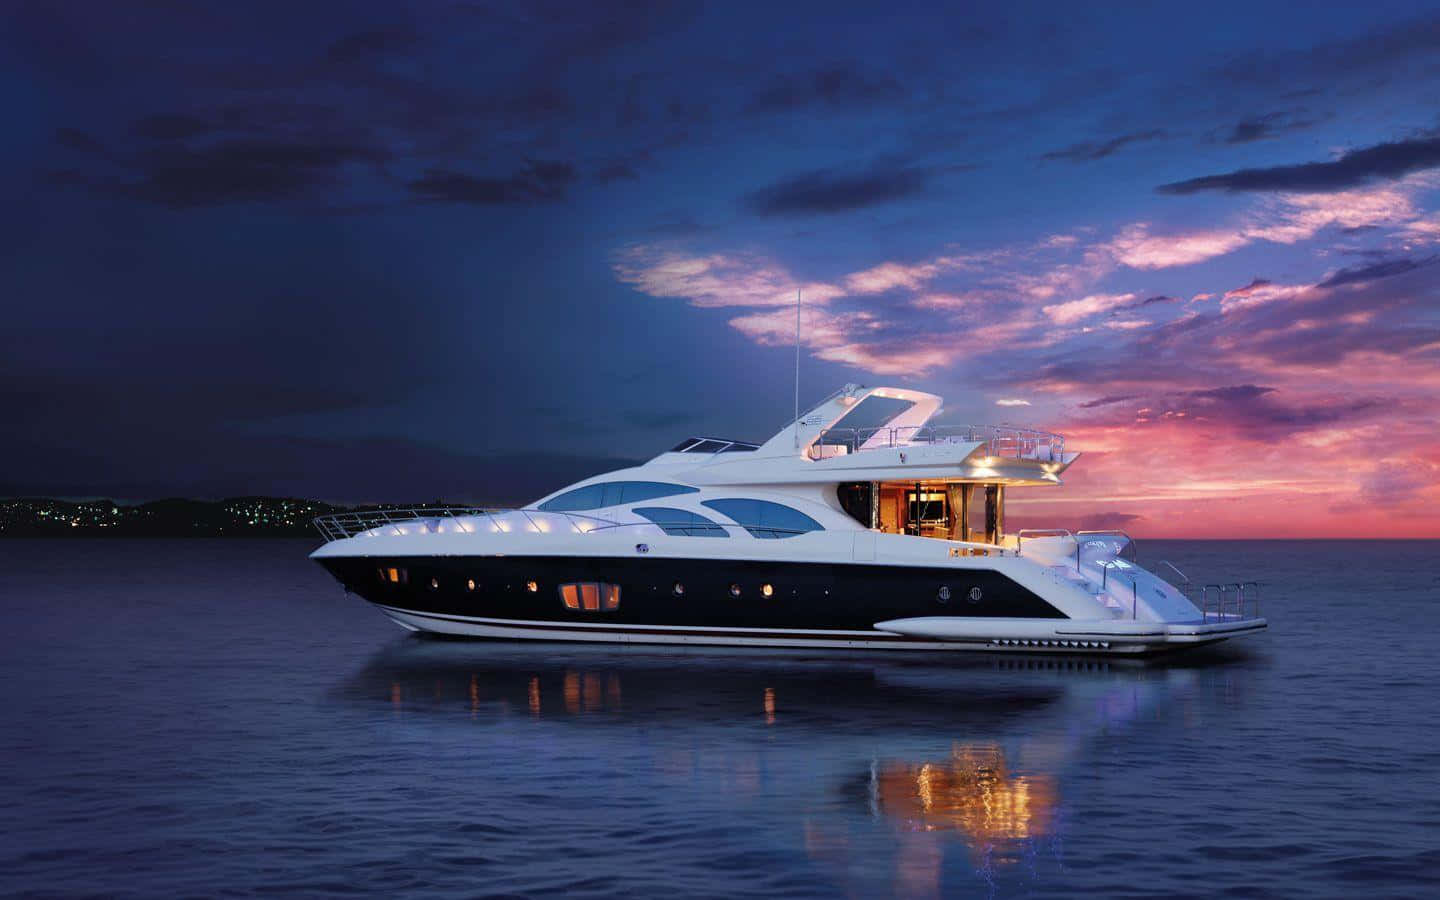 Cruise in elegance with a luxury yacht